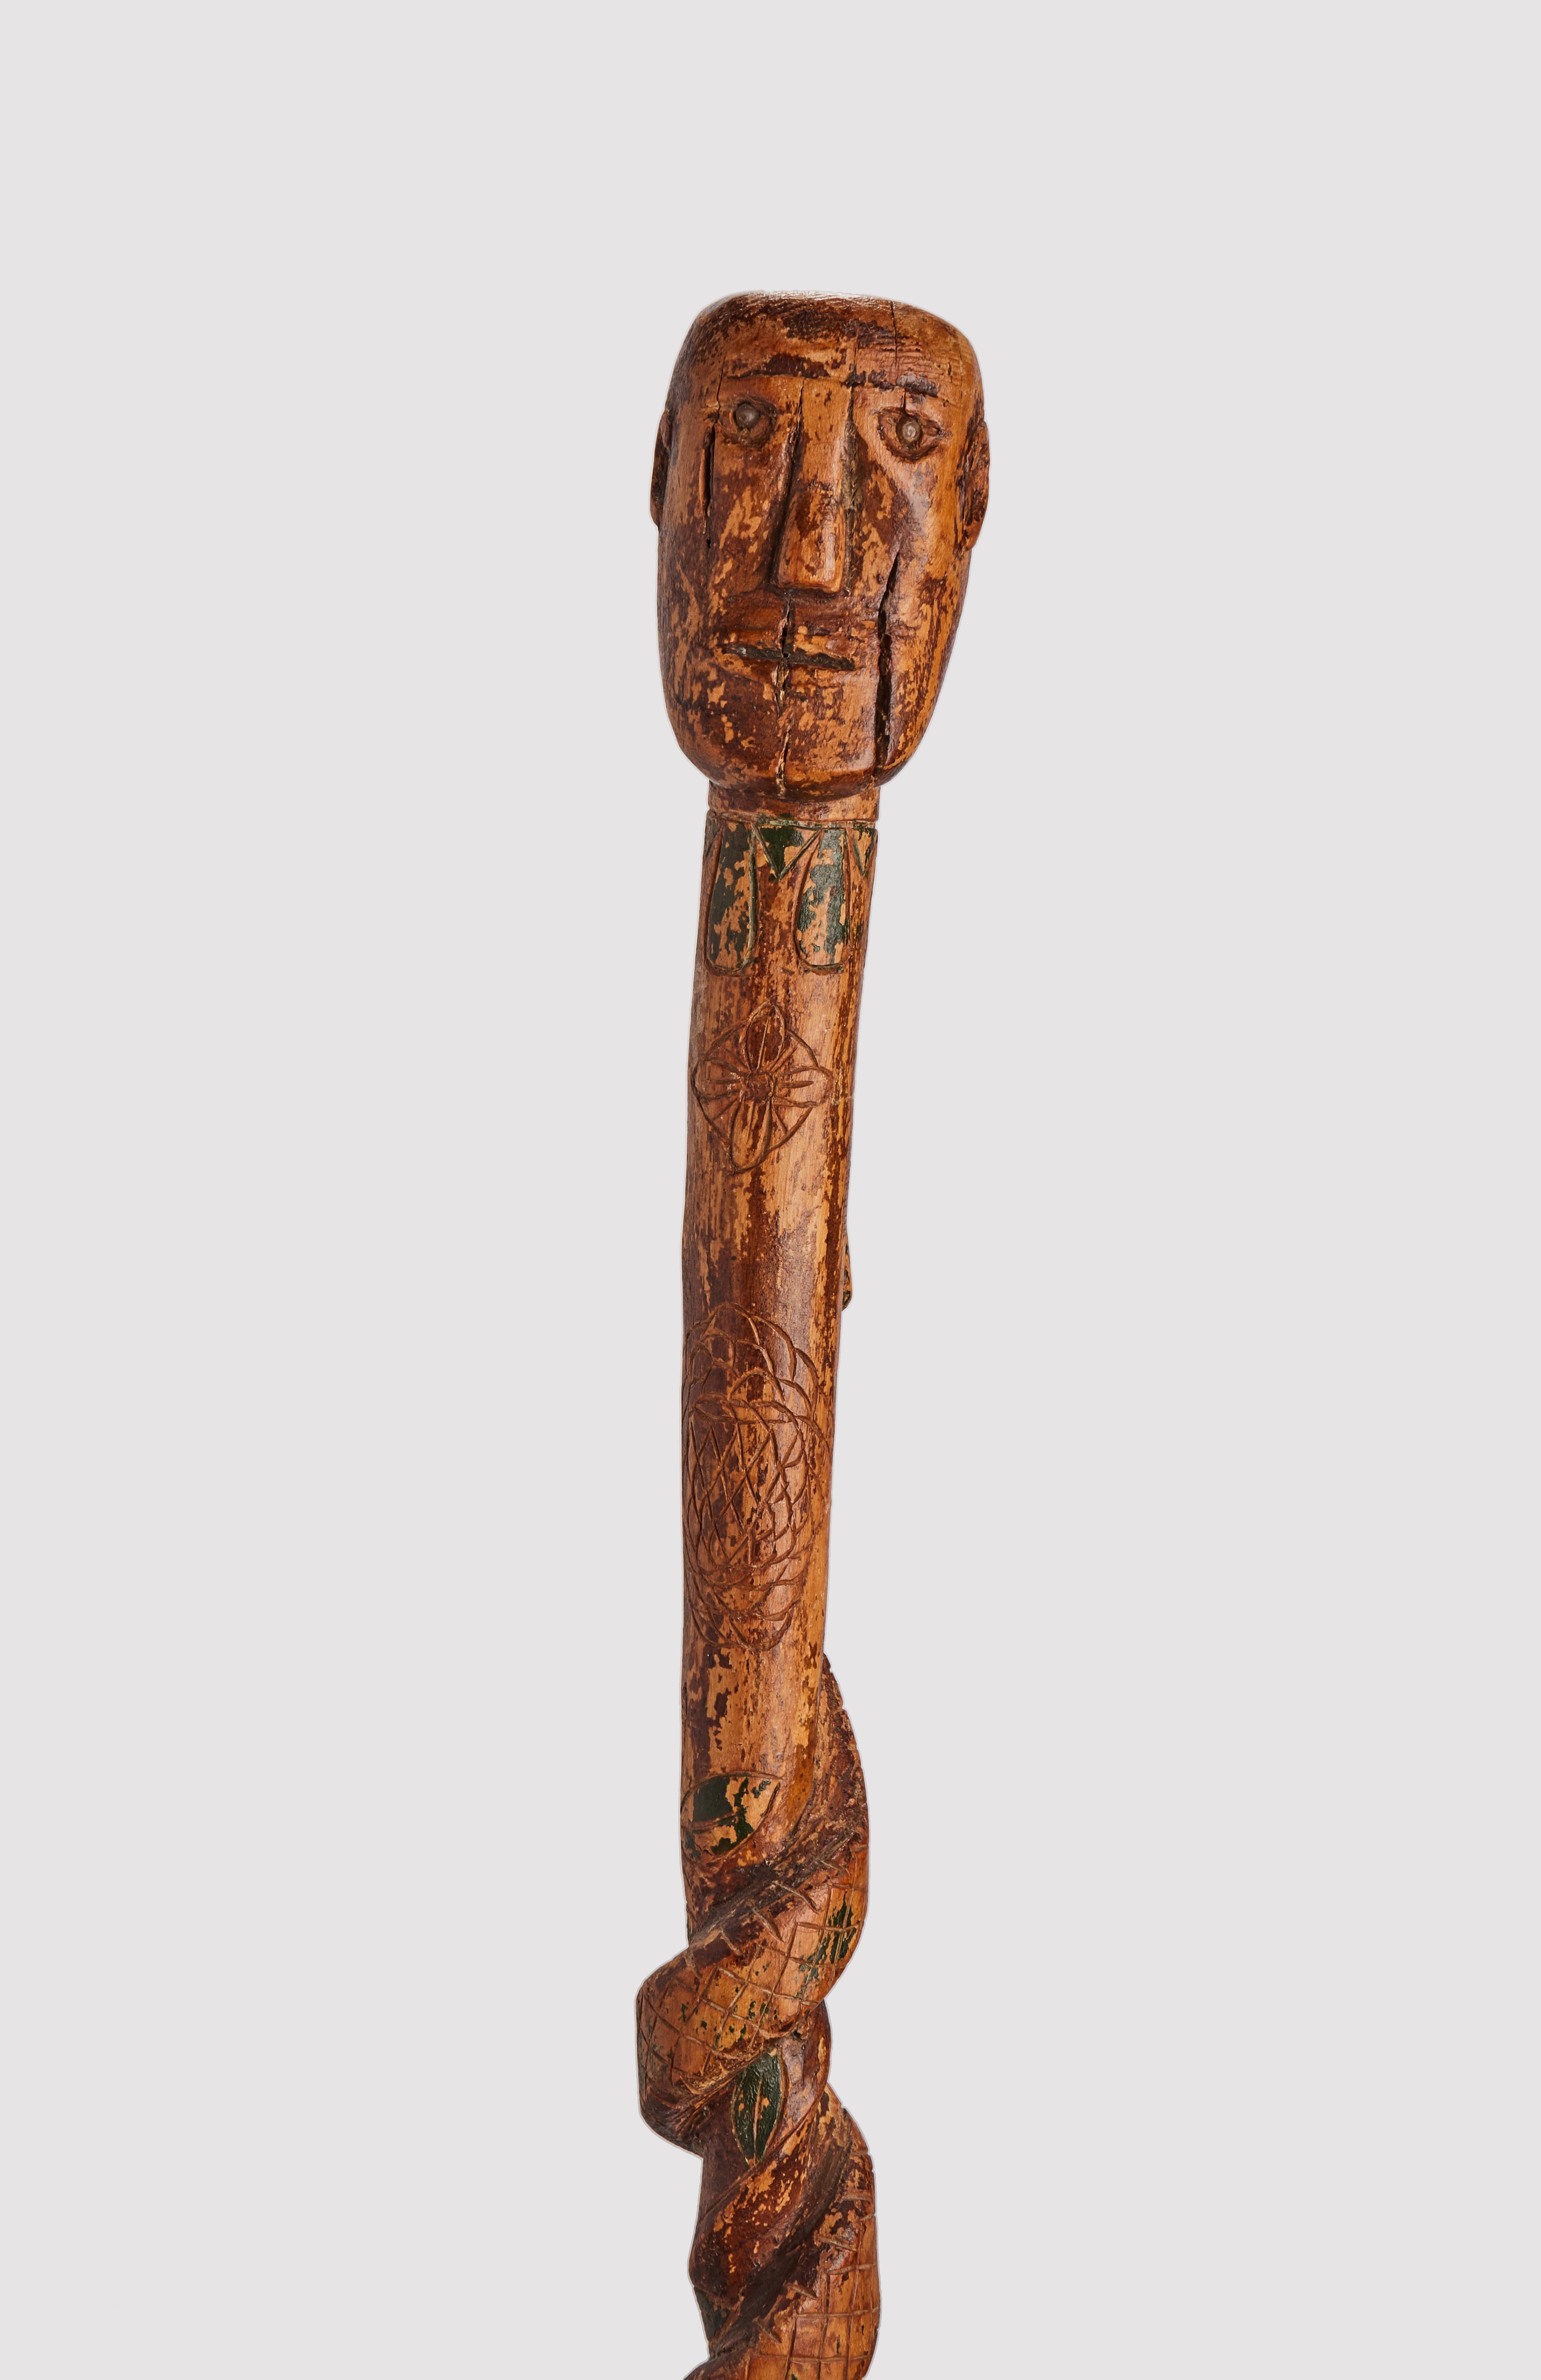 Folk art walking stick: one piece of fruitwood depicting the head of a man with snake along the curved shafts painted green. End of 19th century.